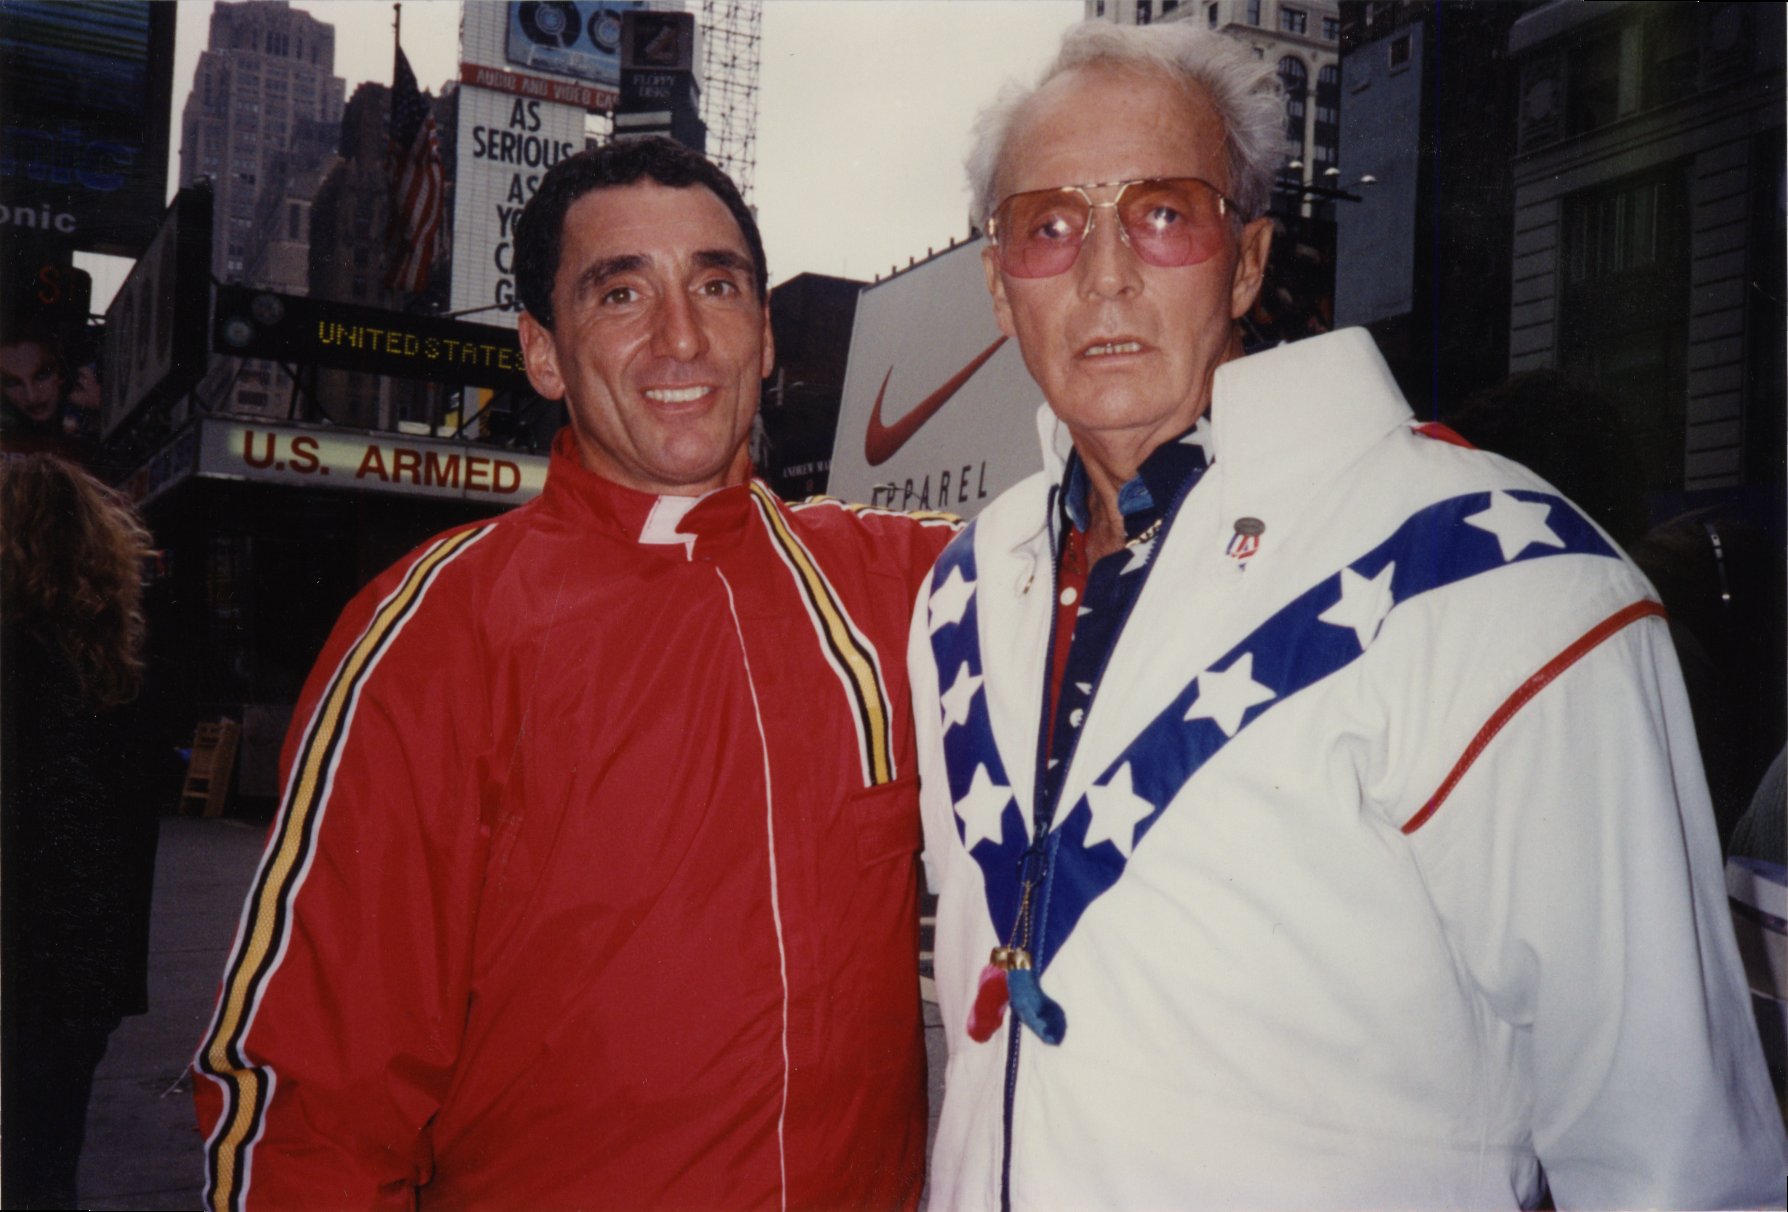 David Copeland and Evel Knievel, after a successful bicycle jump for Viva Variety on Comedy Central.